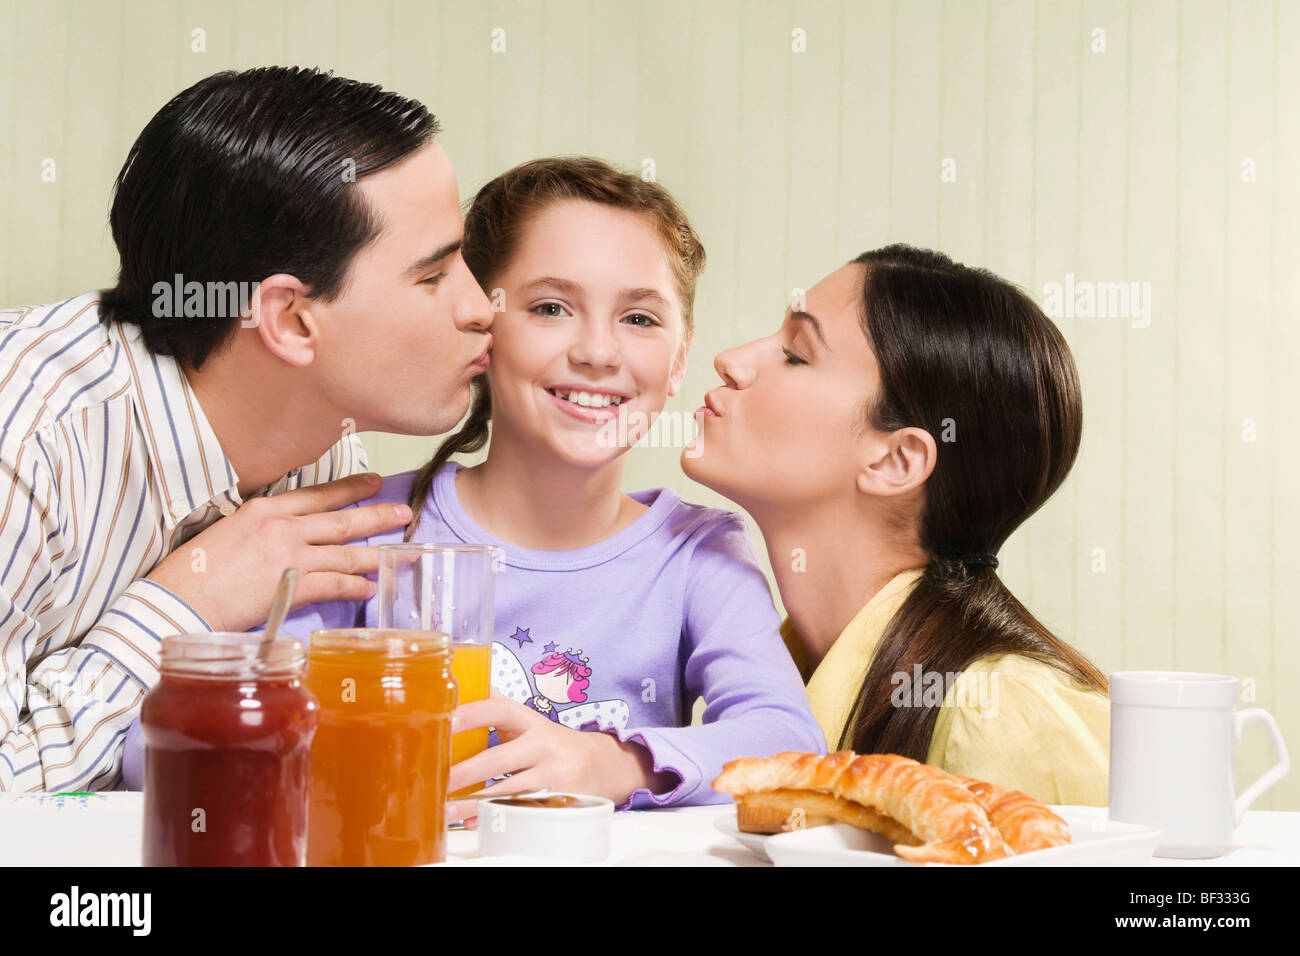 Couple kissing their daughter Stock Photo